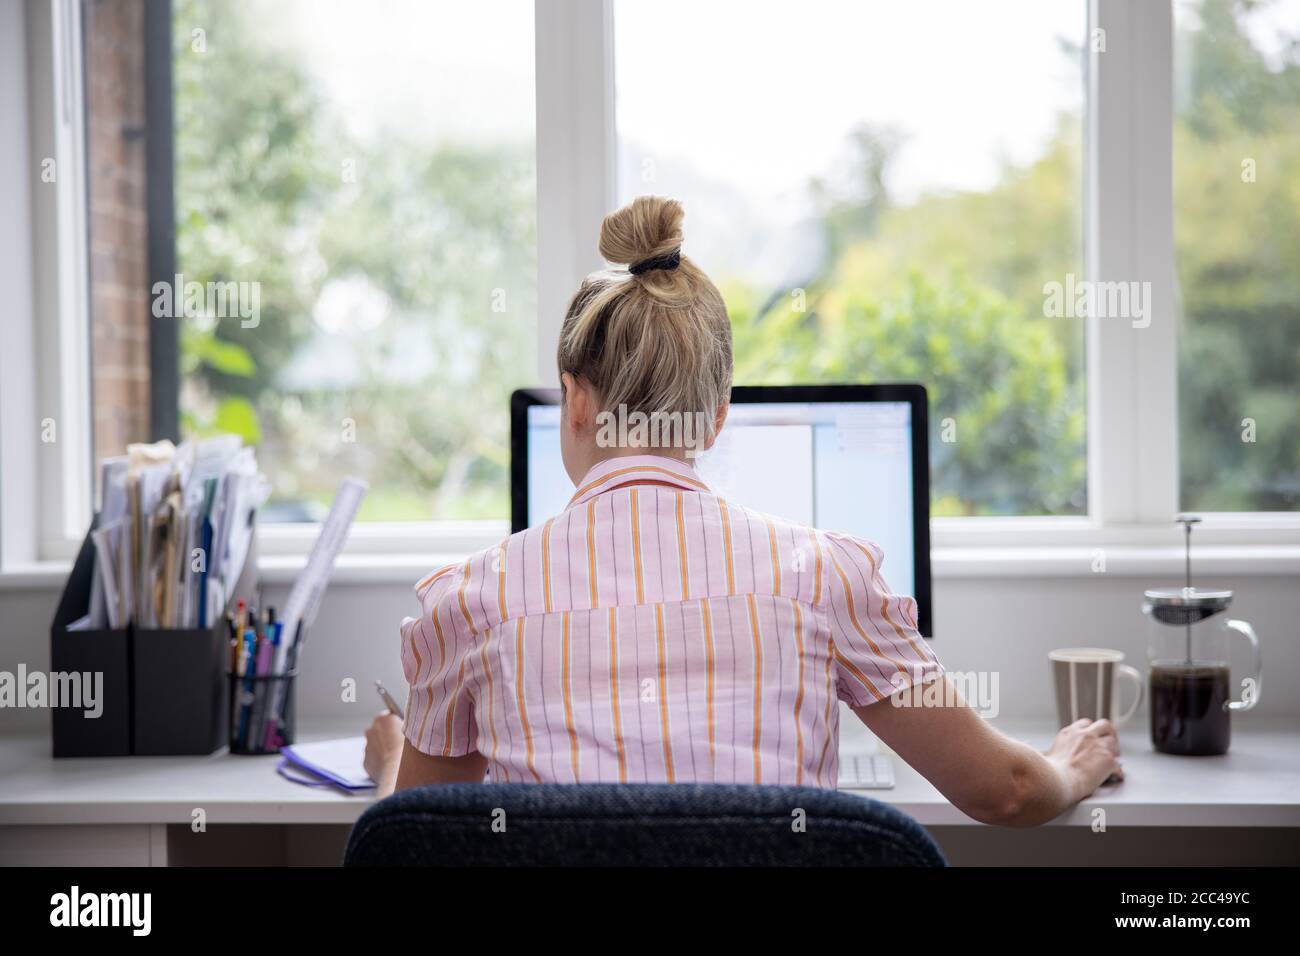 Rear View Of Woman Working From Home On Computer  In Home Office Stock Photo